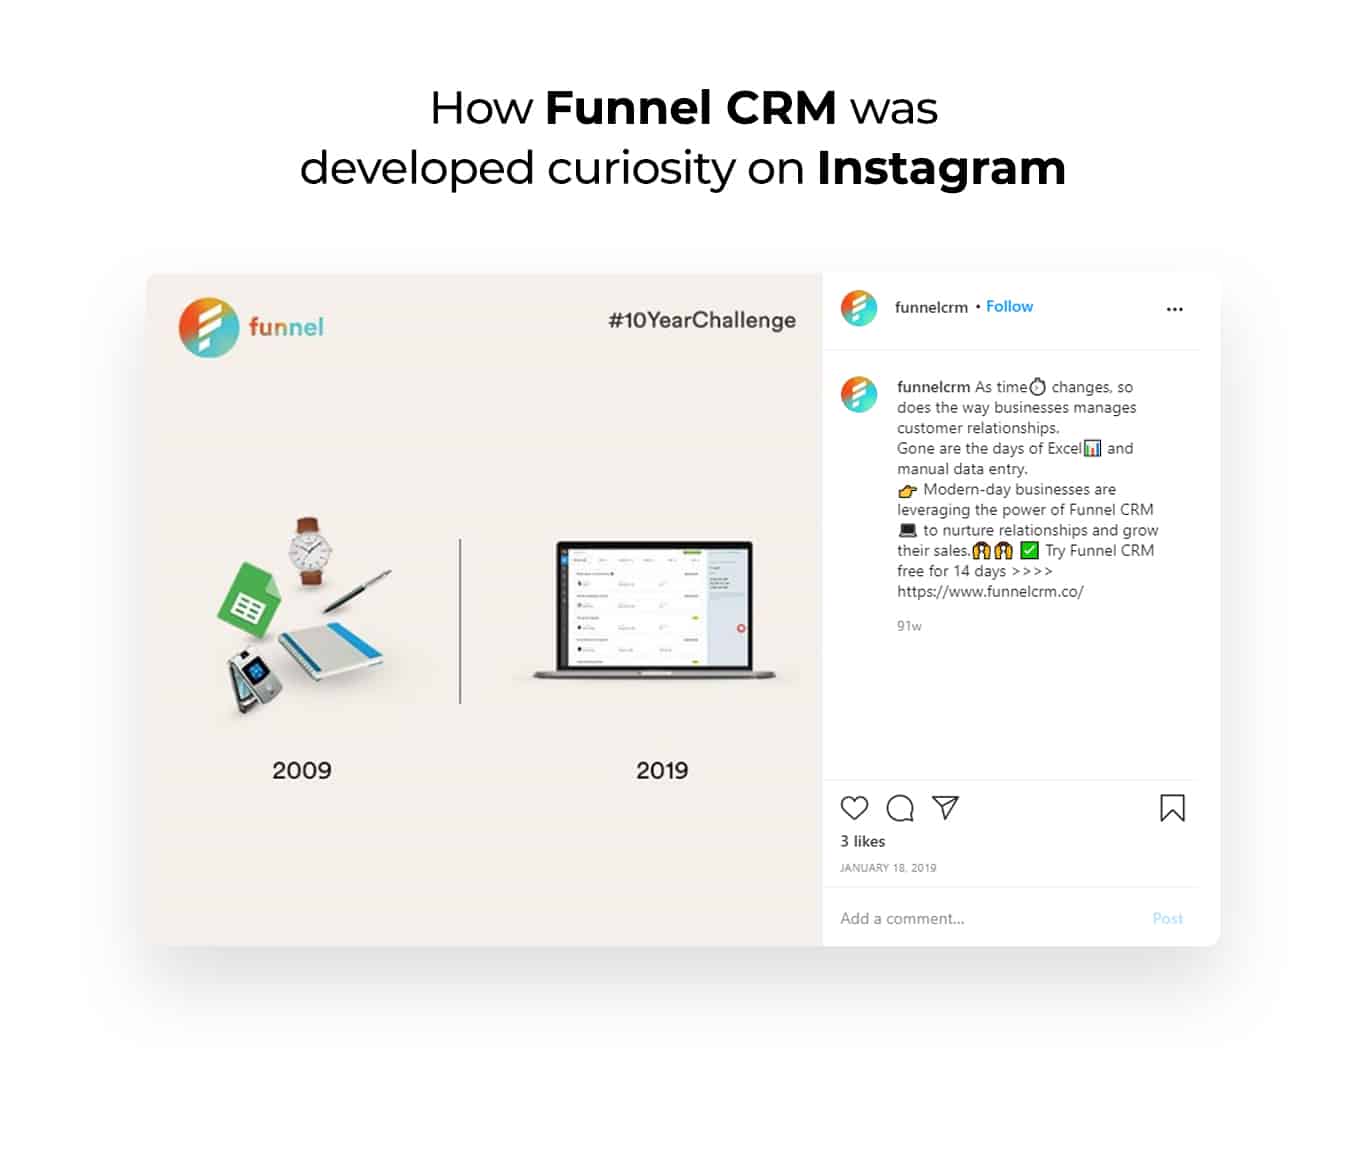 Funnel CRM Posts on Instagram developing curiosity in consumers mind